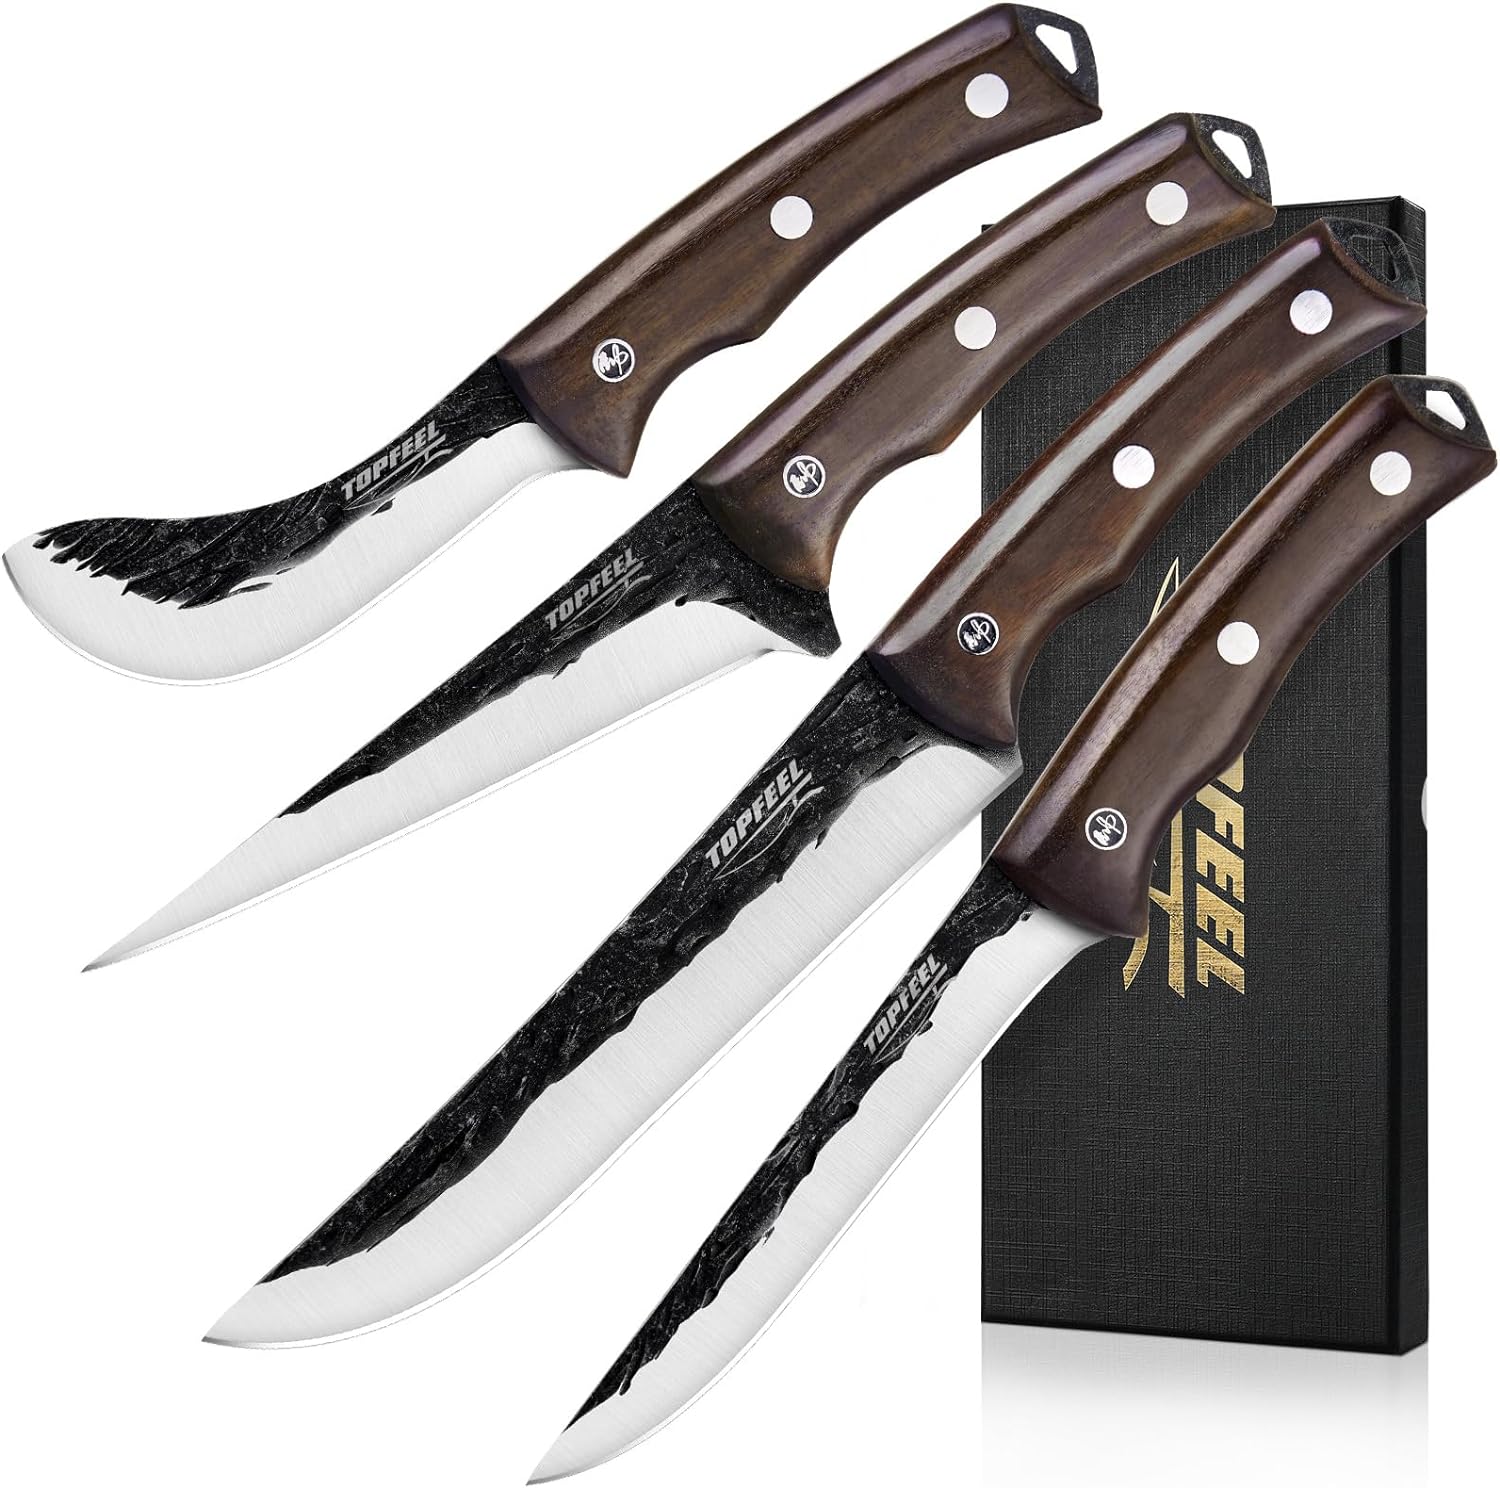 Topfeel 4PCS Hand Forged Butcher Knife Set - Slicing Knife,Boning Knife, Dividing knife,Skinning Butcher Knife,High Carbon Steel Meat Cutting Knife for Home Kitchen & Outdoor